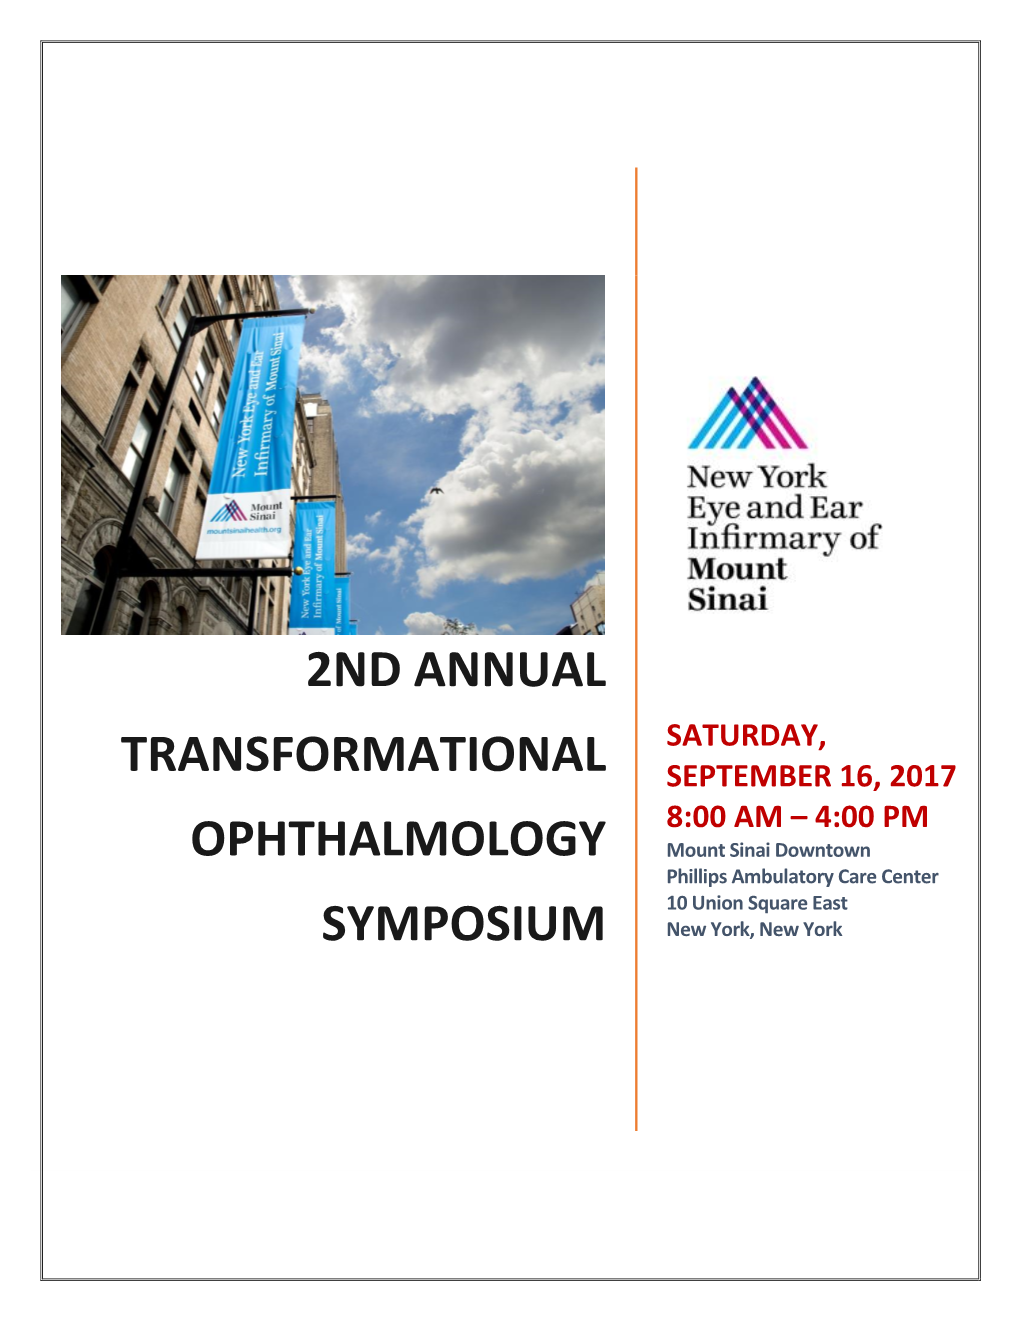 2ND ANNUAL TRANSFORMATIONAL OPHTHALMOLOGY SYMPOSIUM Saturday, September 16, 2017 ~ 8:00 Am – 4:00 Pm